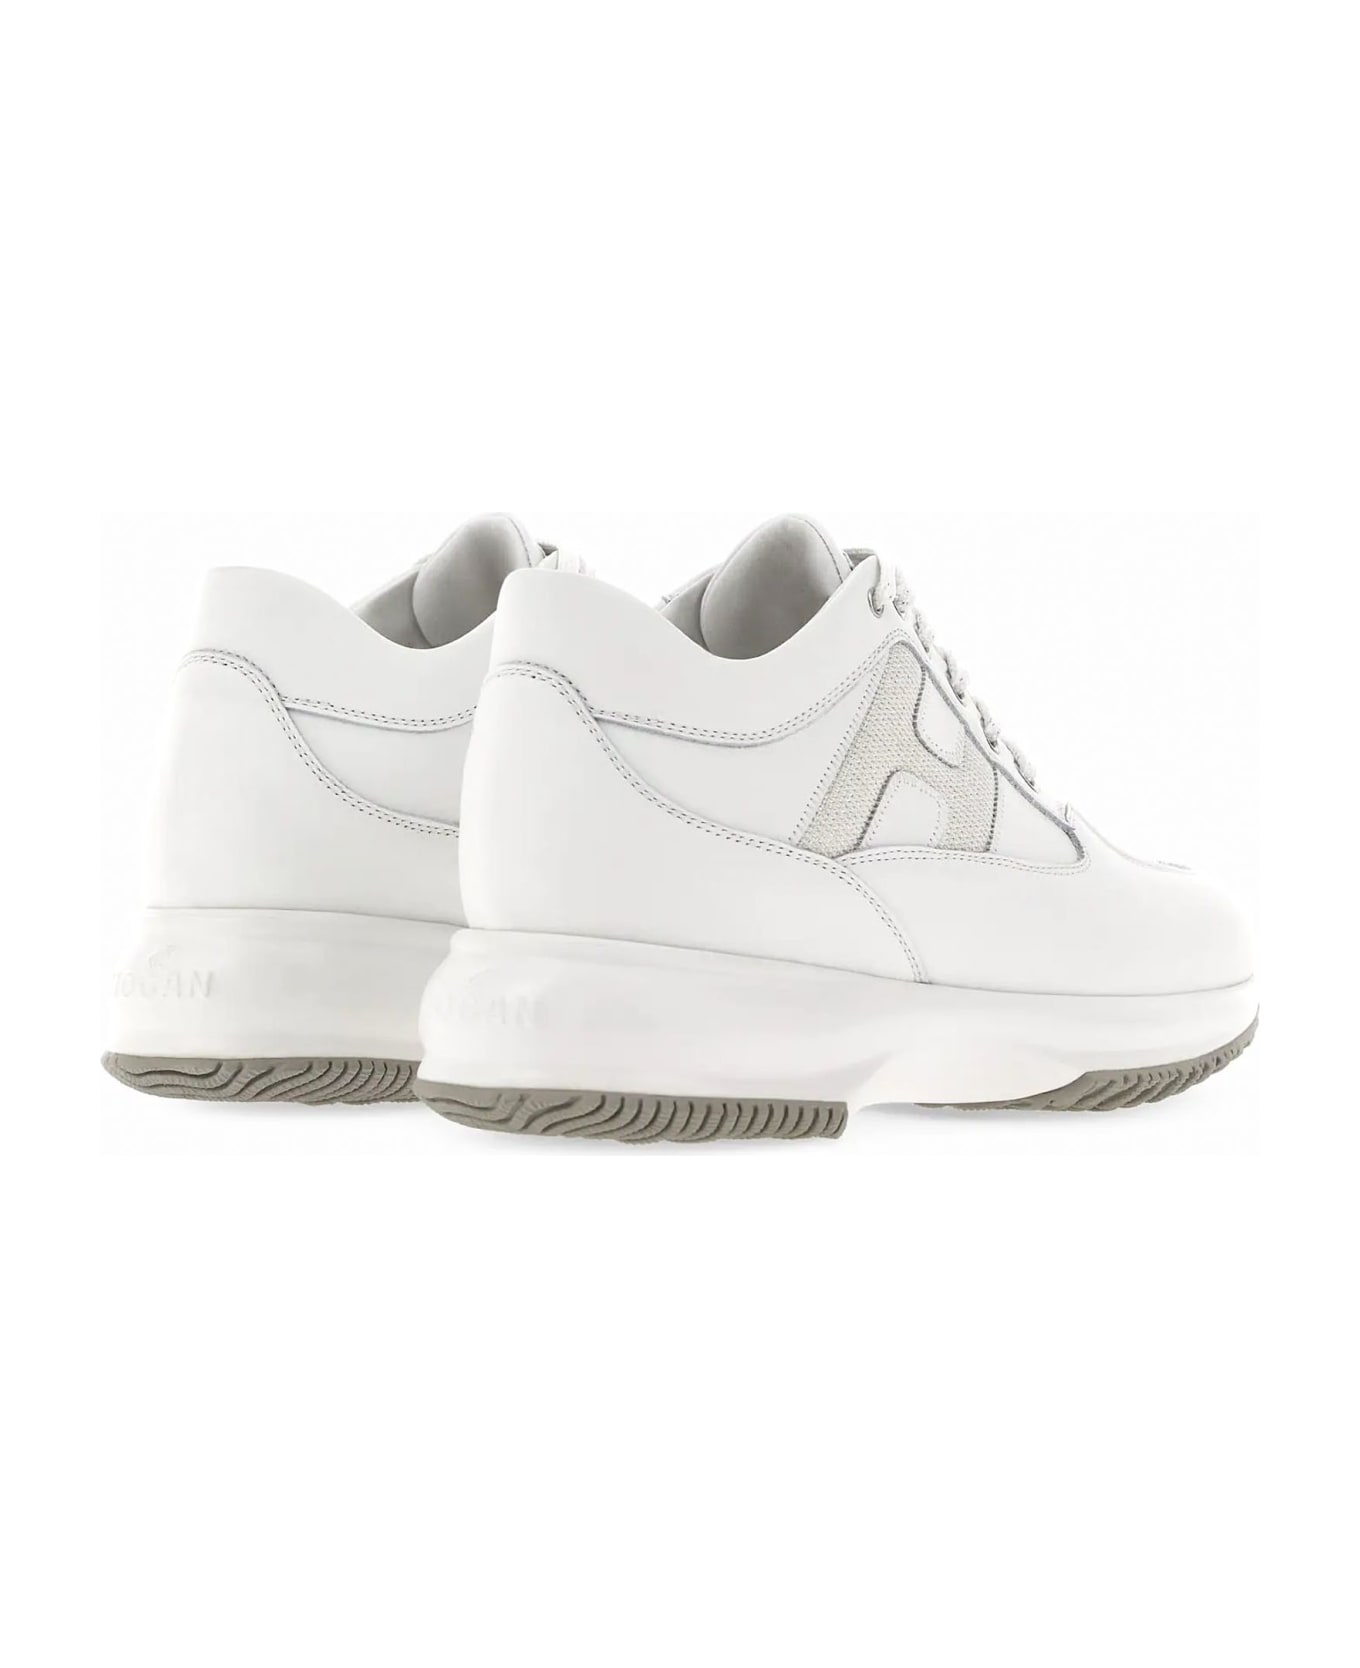 Hogan Interactive Leather Sneakers - White